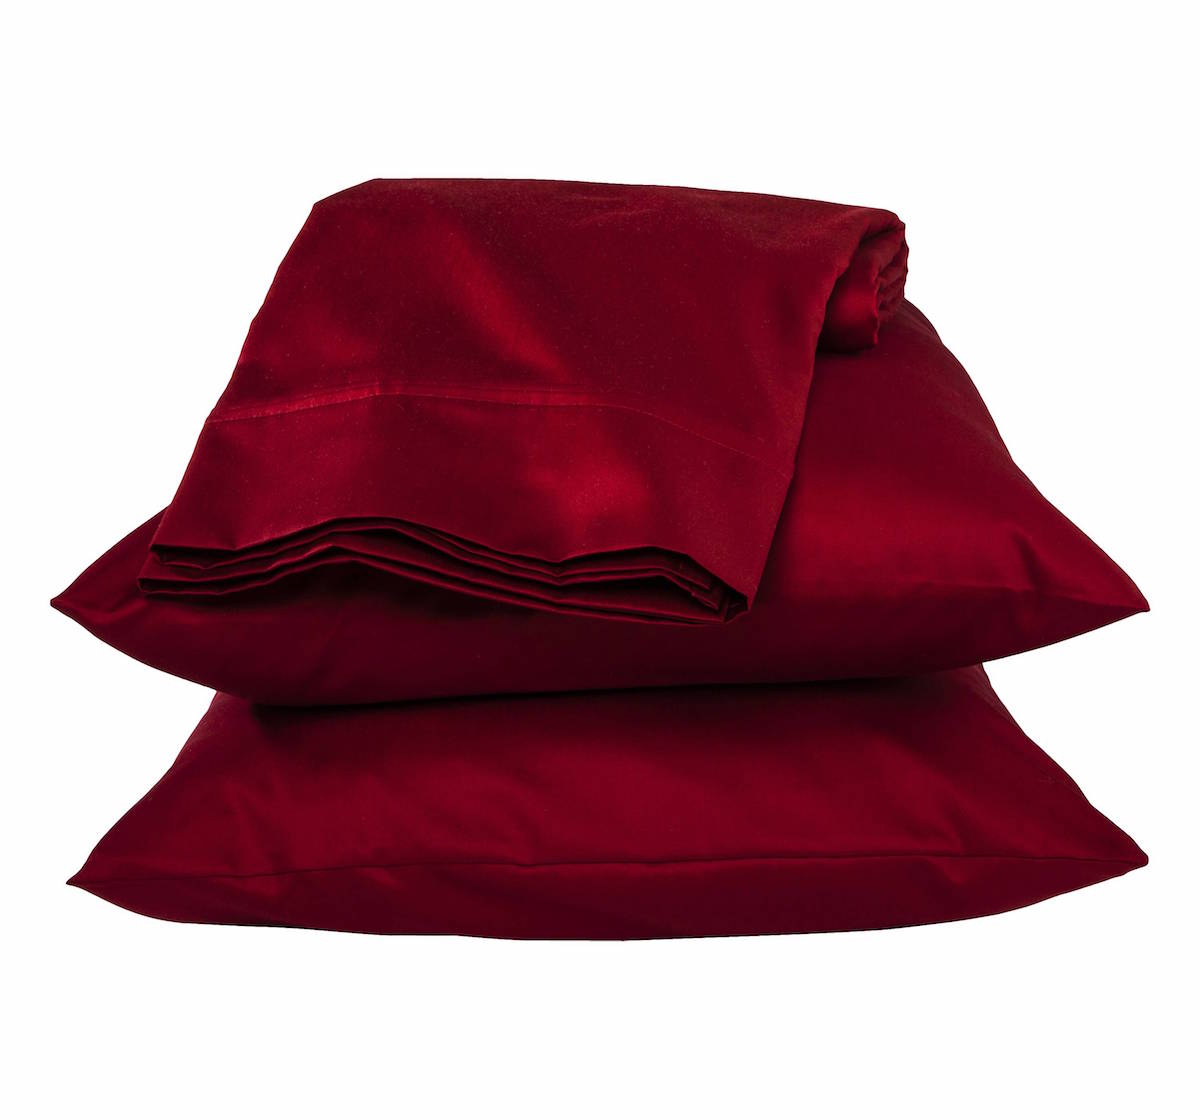 A stack of two pillows in pillow cases plus sheets folded up on top of them. They are red.